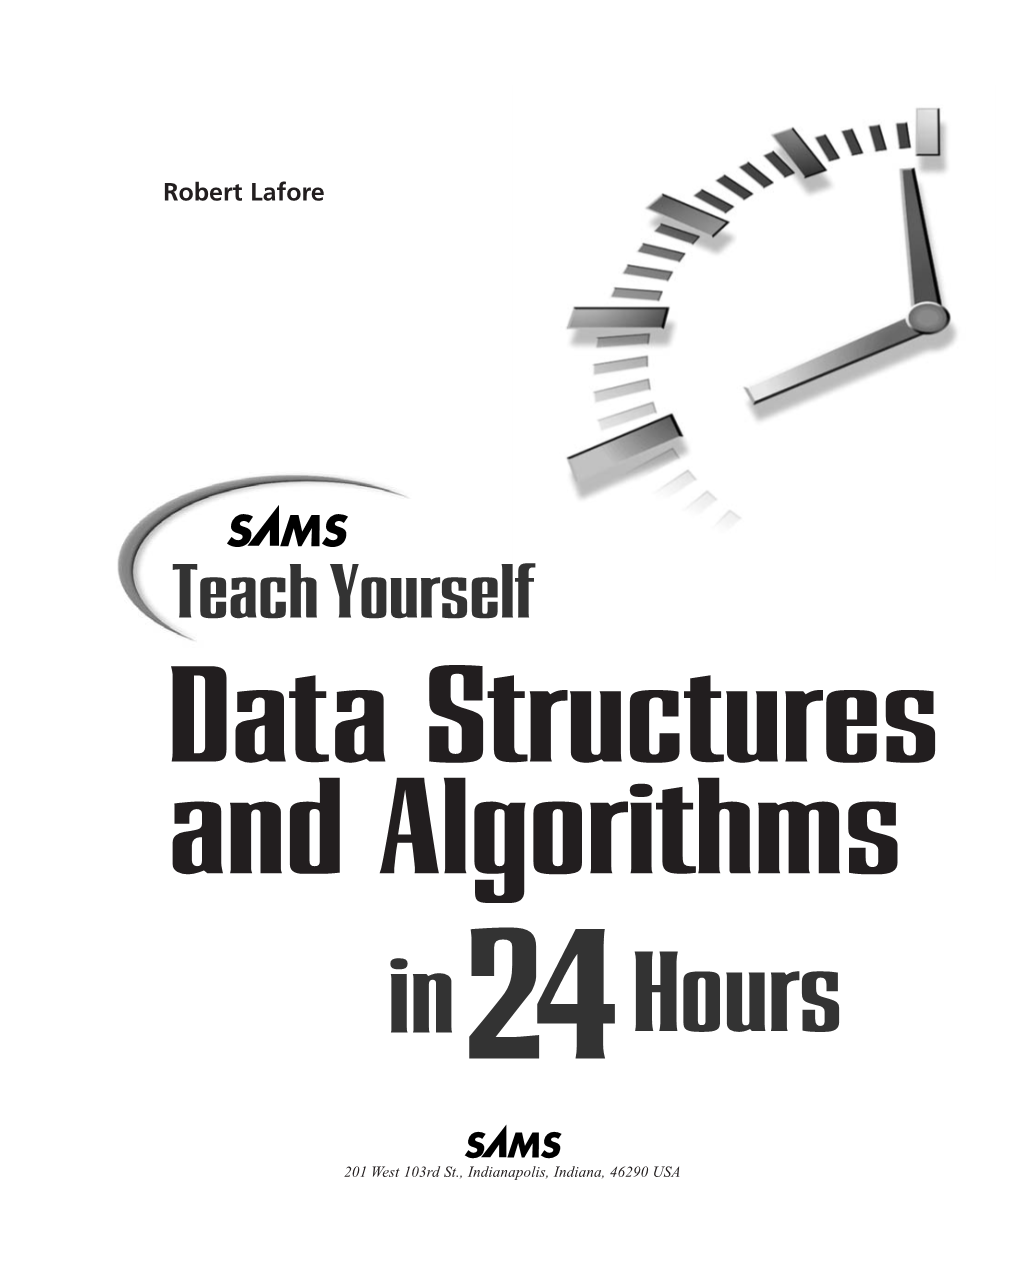 Teach Yourself Data Structures and Algorithms In24 Hours